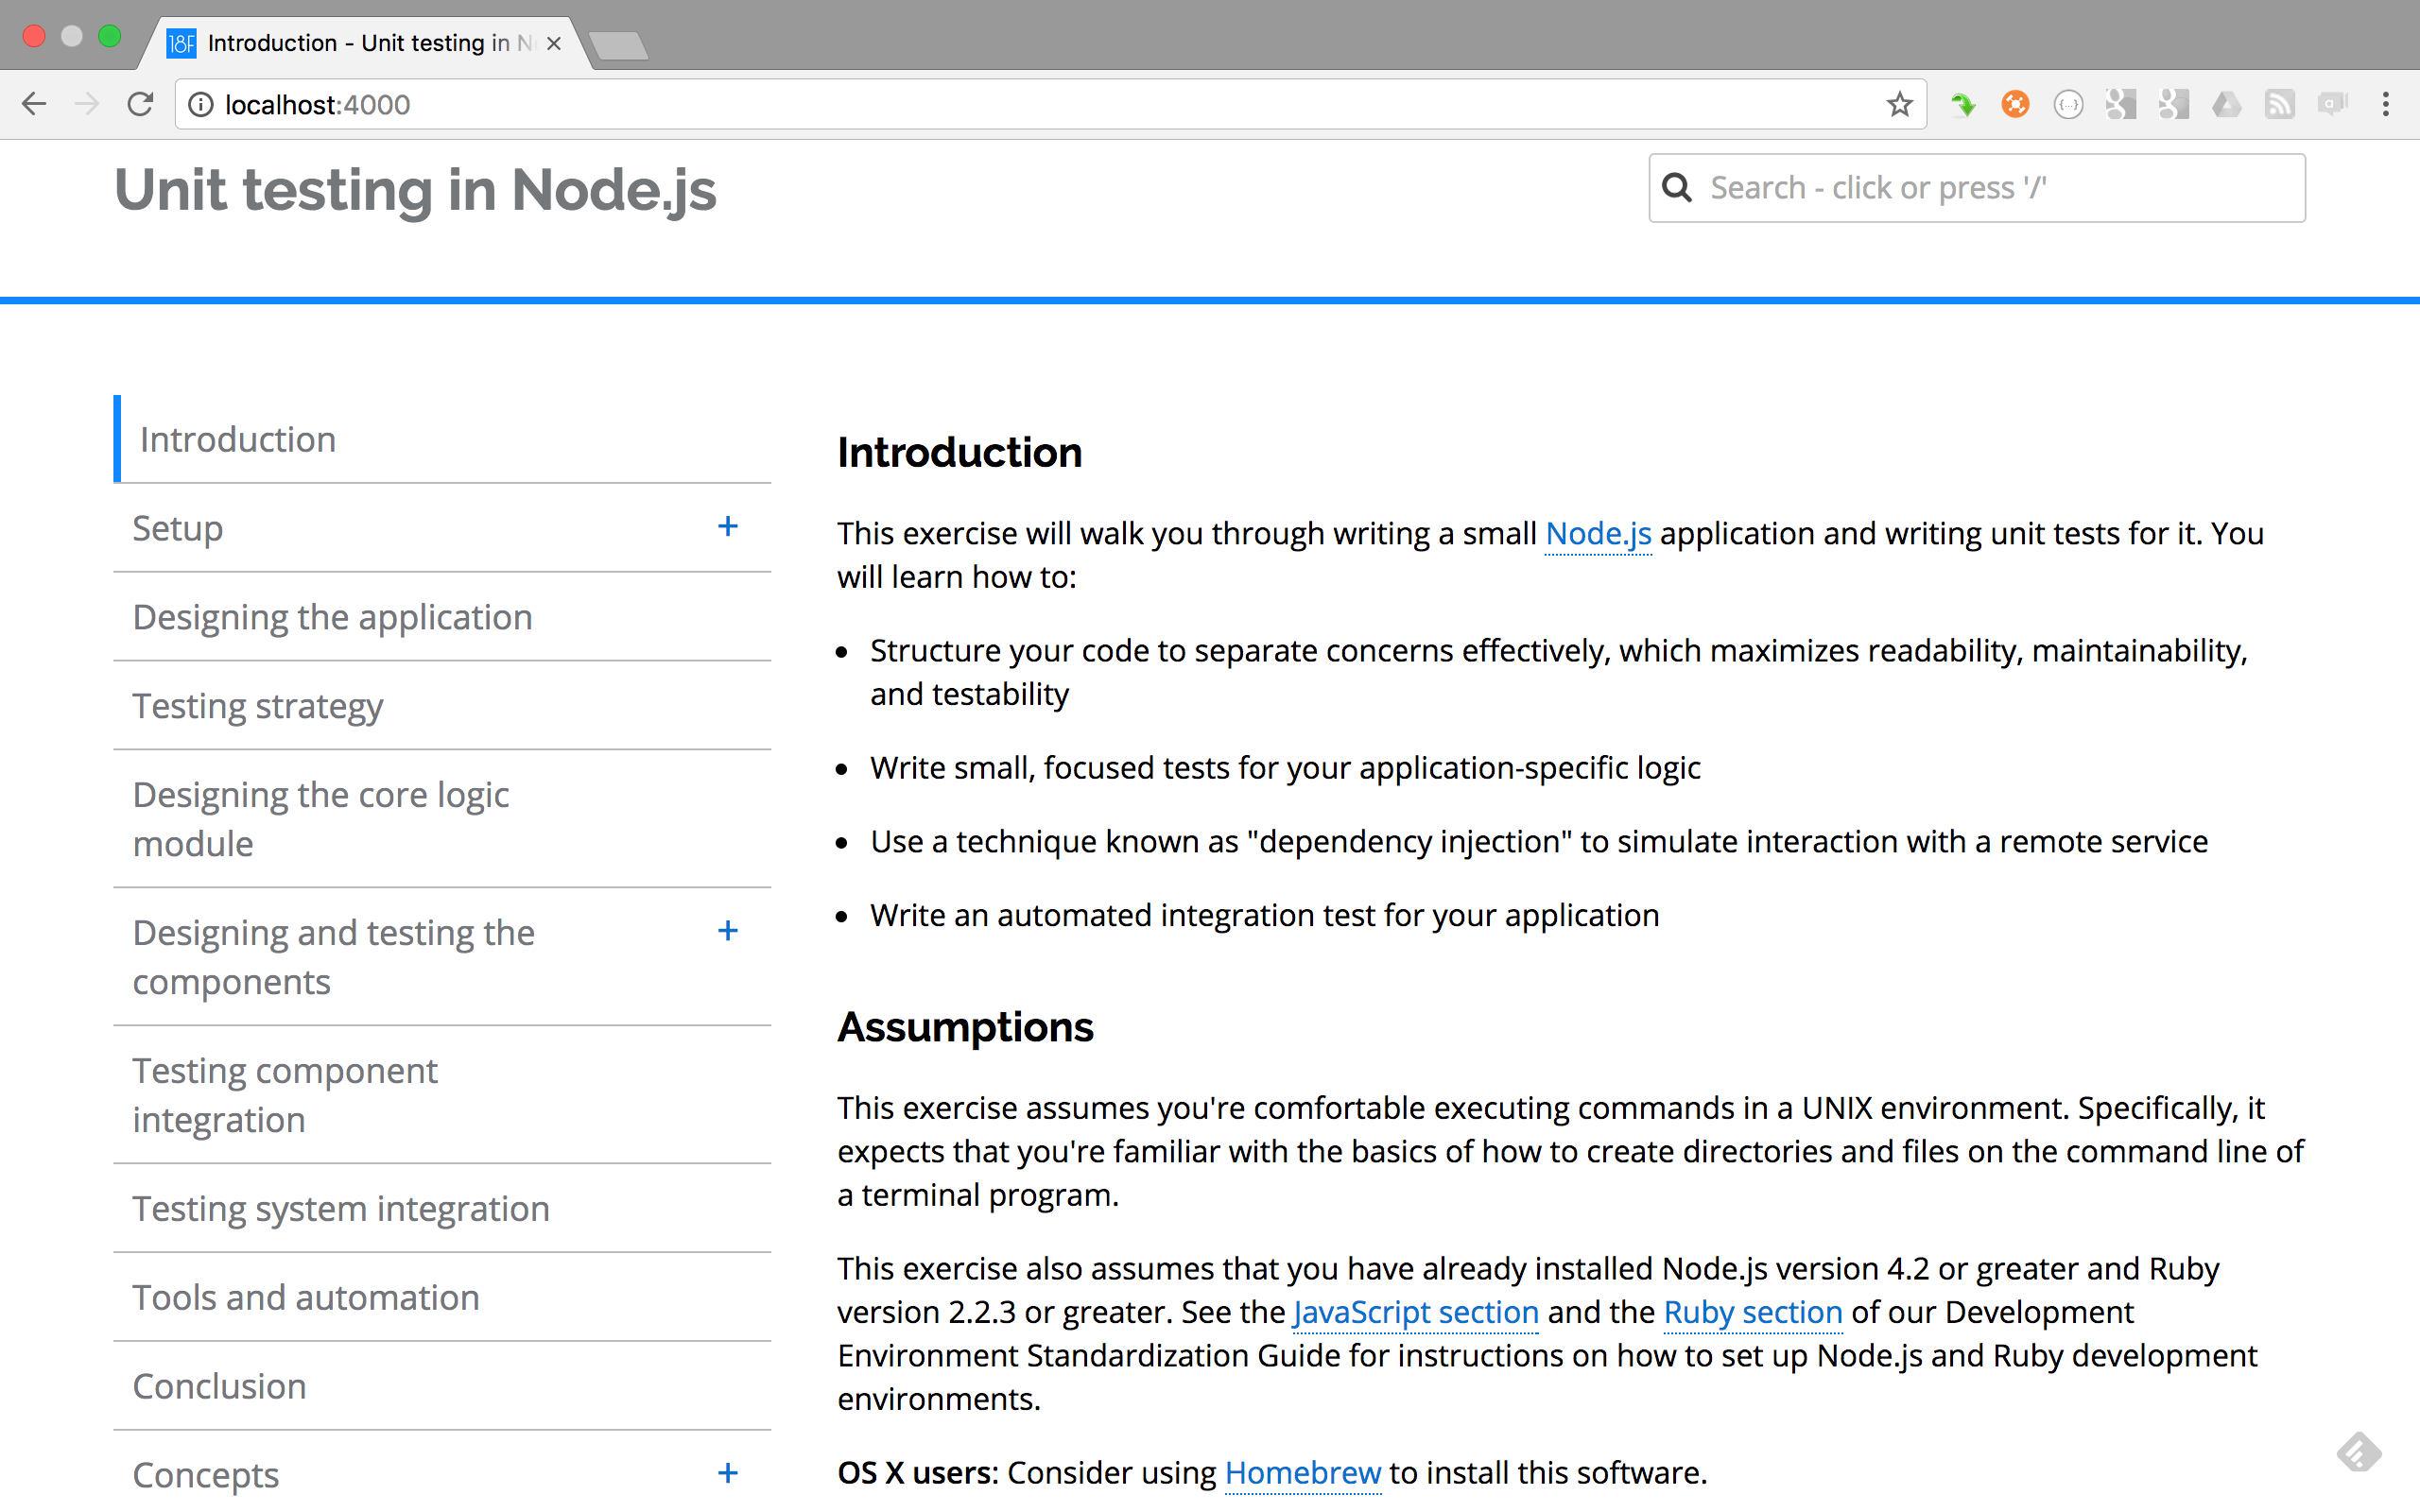 Front page of the Unit testing in Node.js tutorial